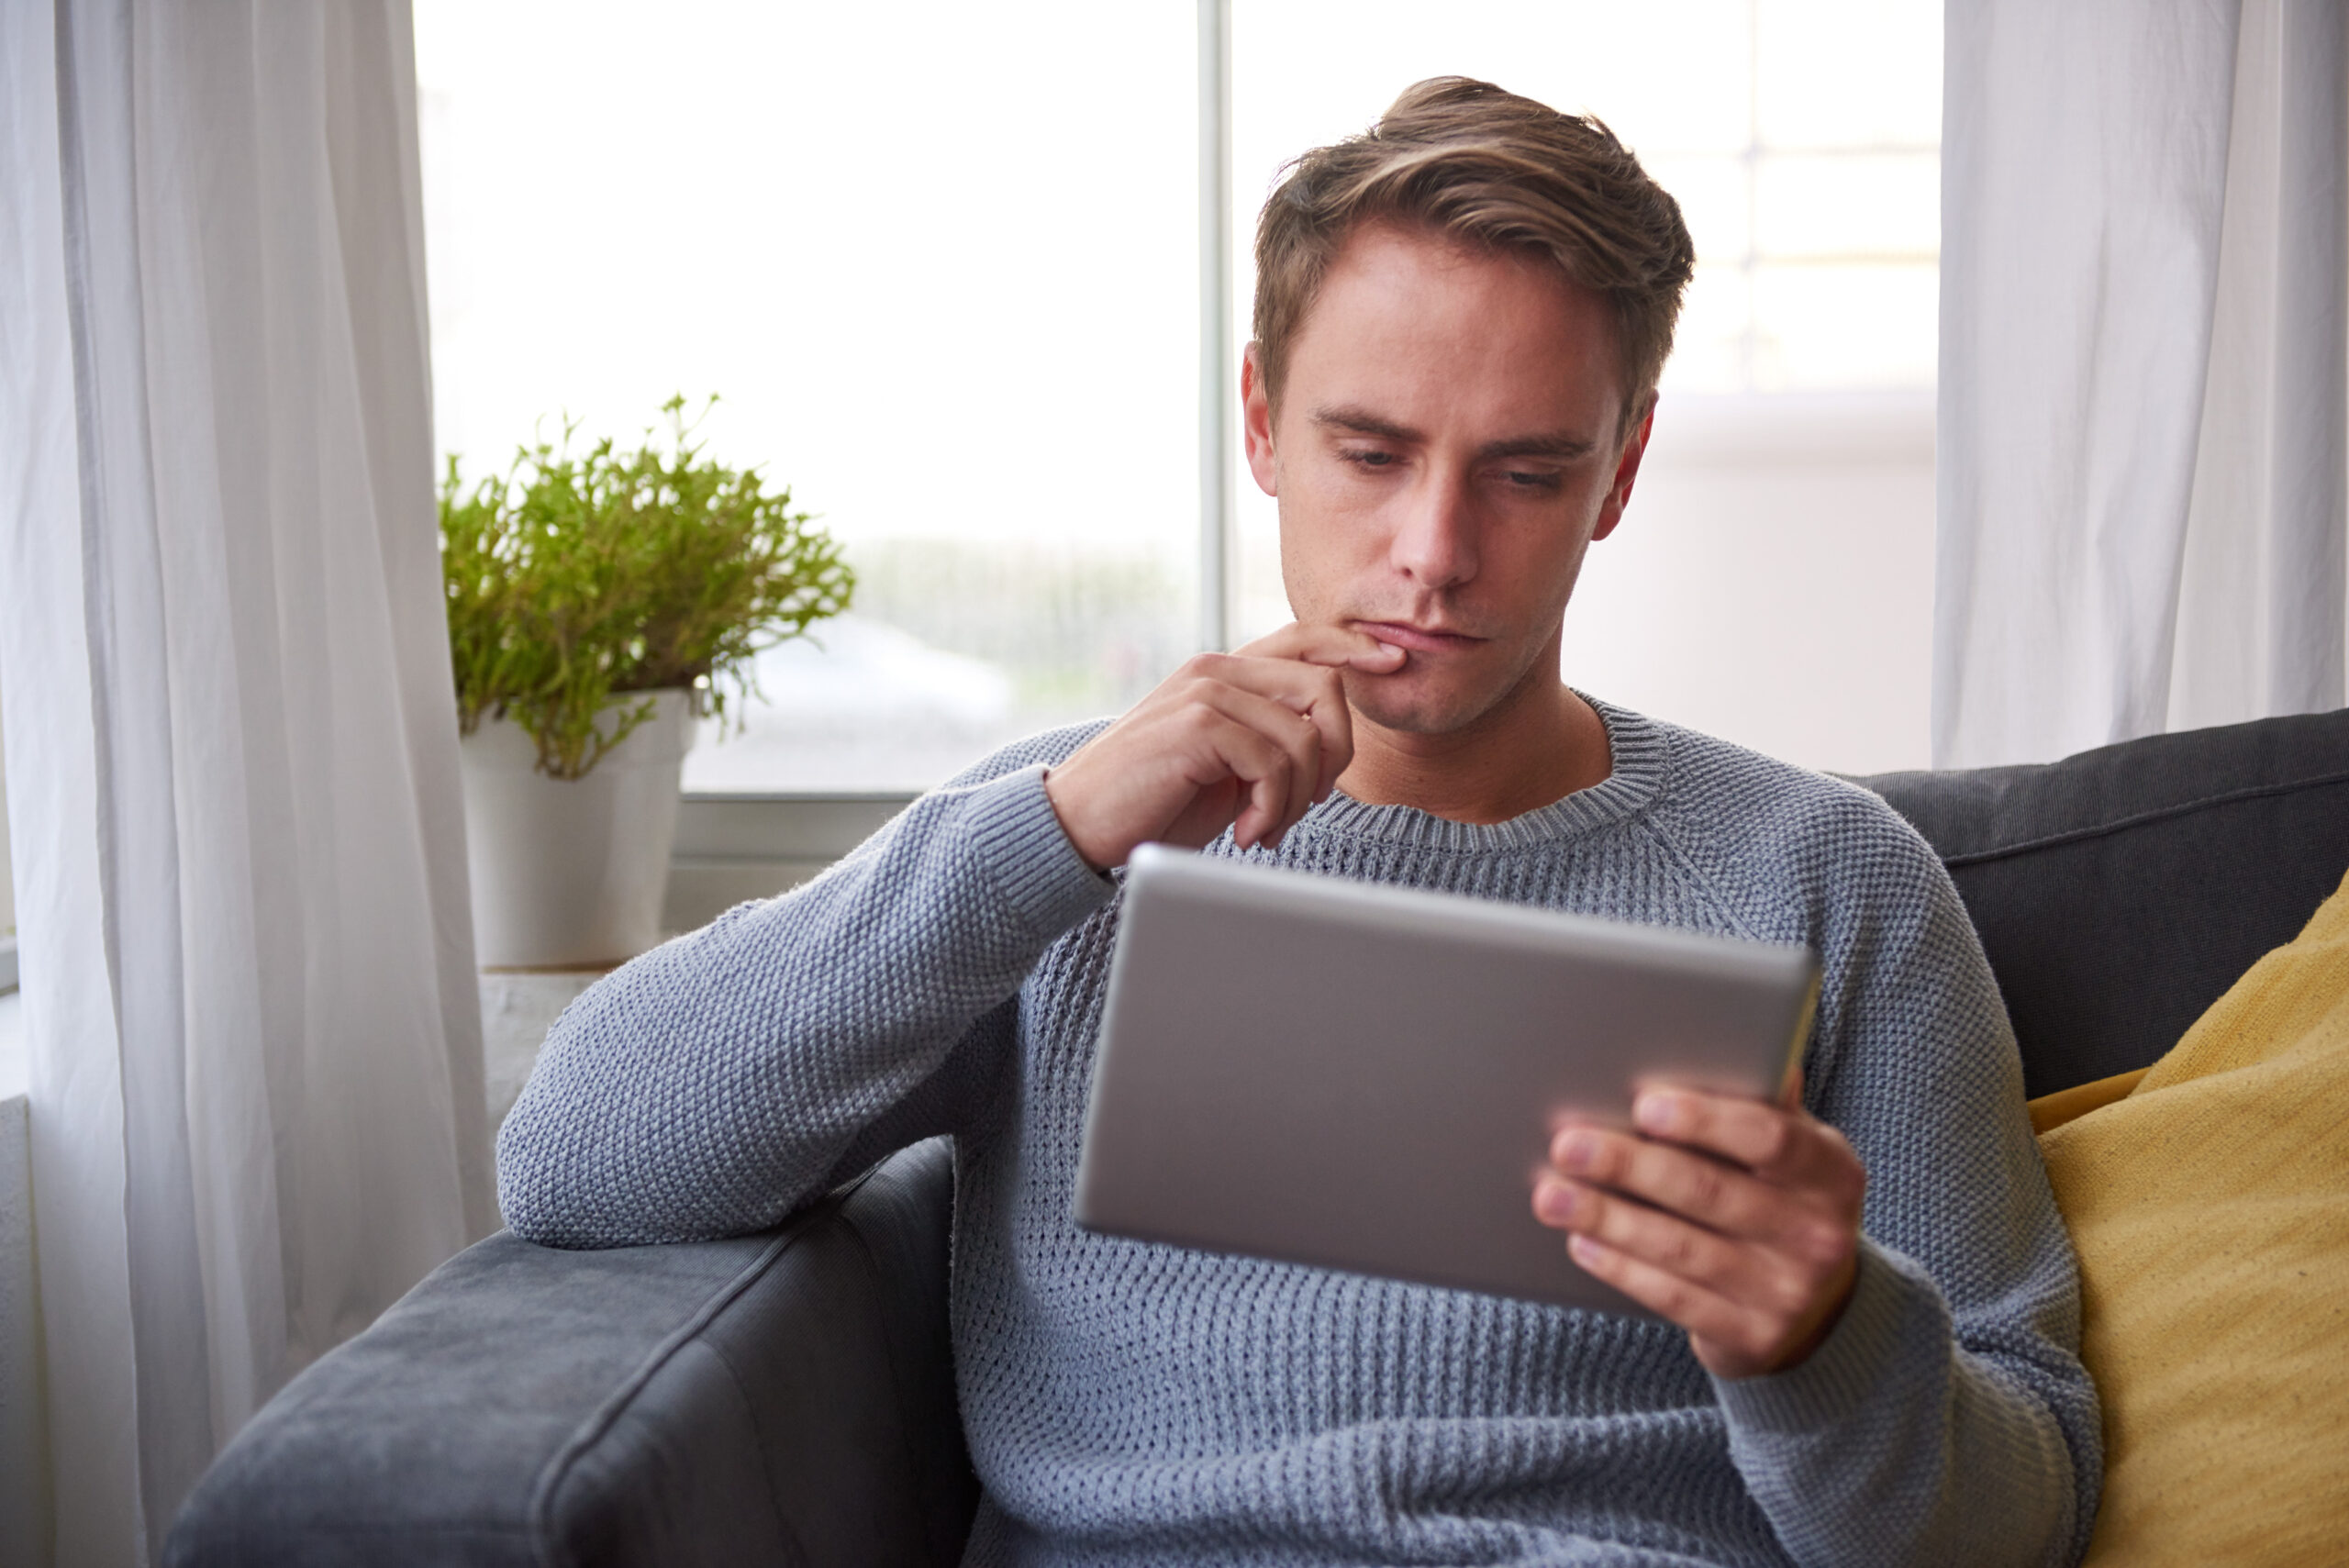 Guy on his couch looking pensive while using a digital tablet